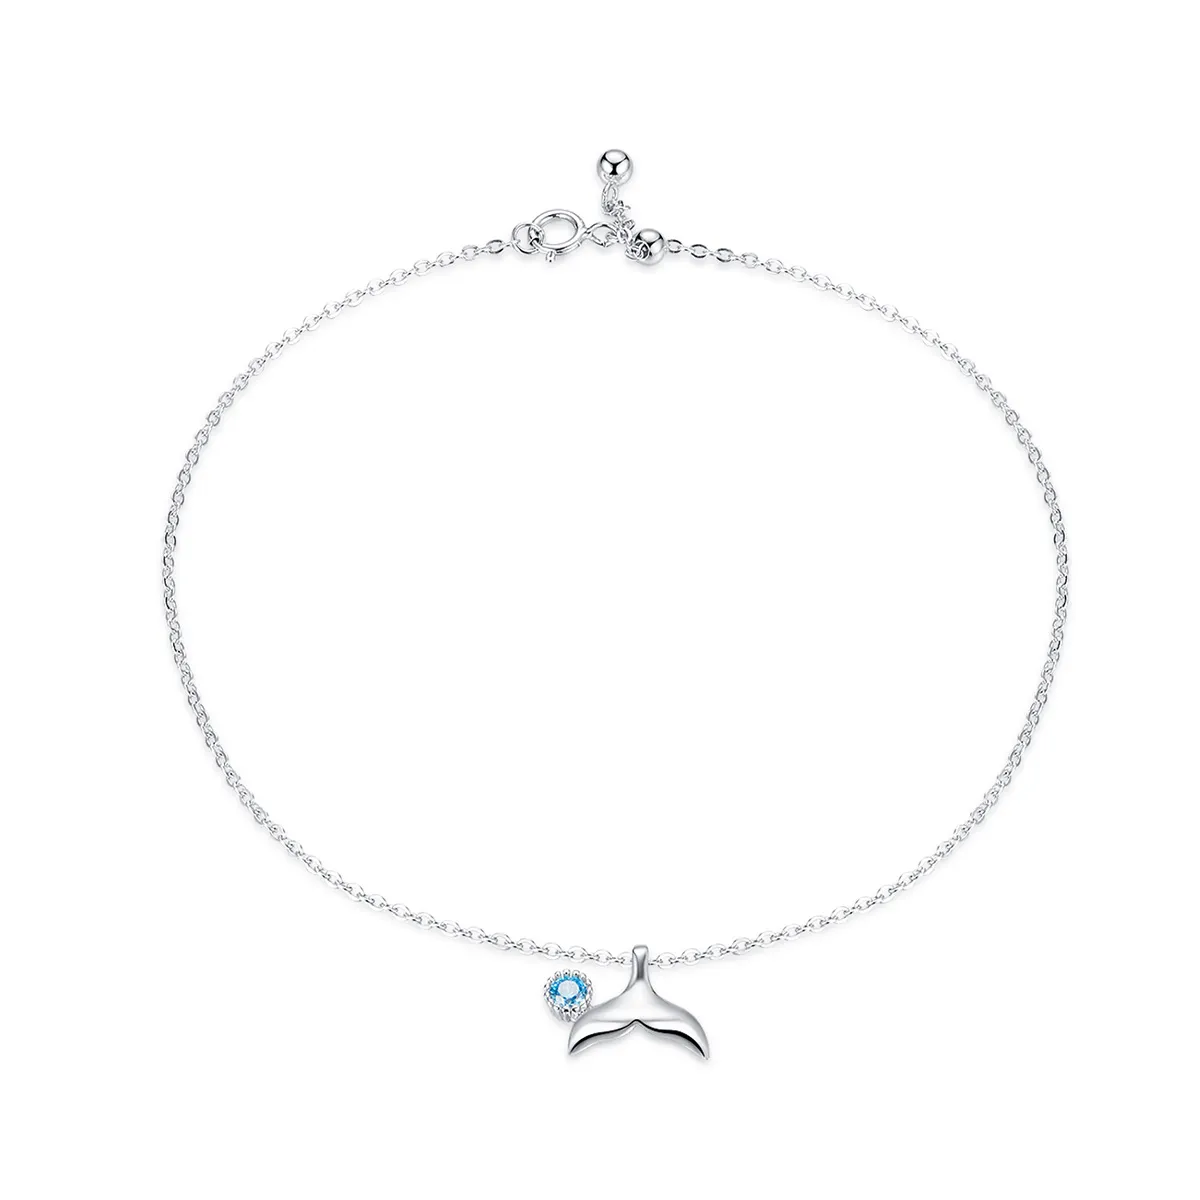 Silver Mermaid Tail Anklet - SCT004